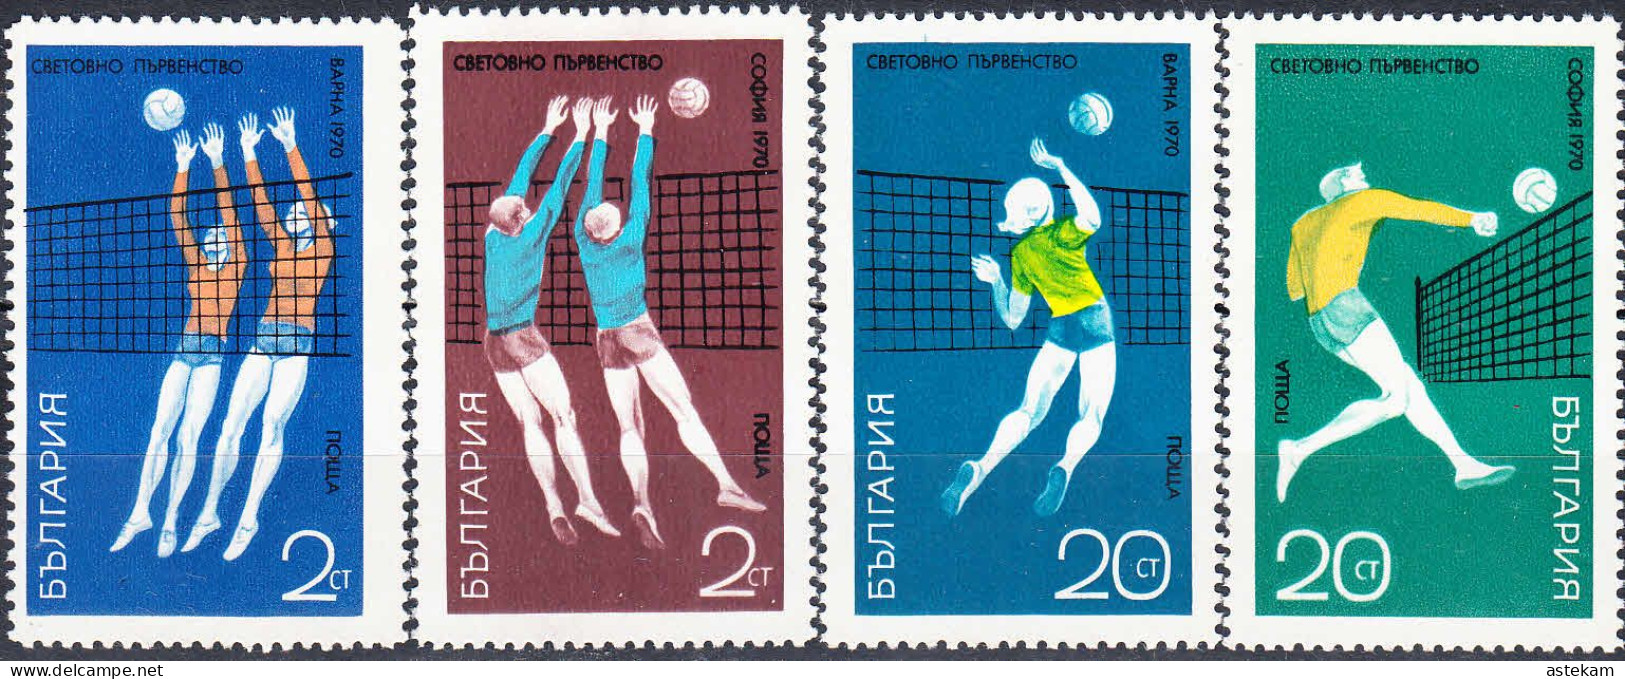 BULGARIA 1970, SPORT, WORLD VOLLEYBALL CHAMPIONSHIP For MEN And WOMEN In SOFIA, COMPLETE MNH SERIES With GOOD QUALITY*** - Nuevos